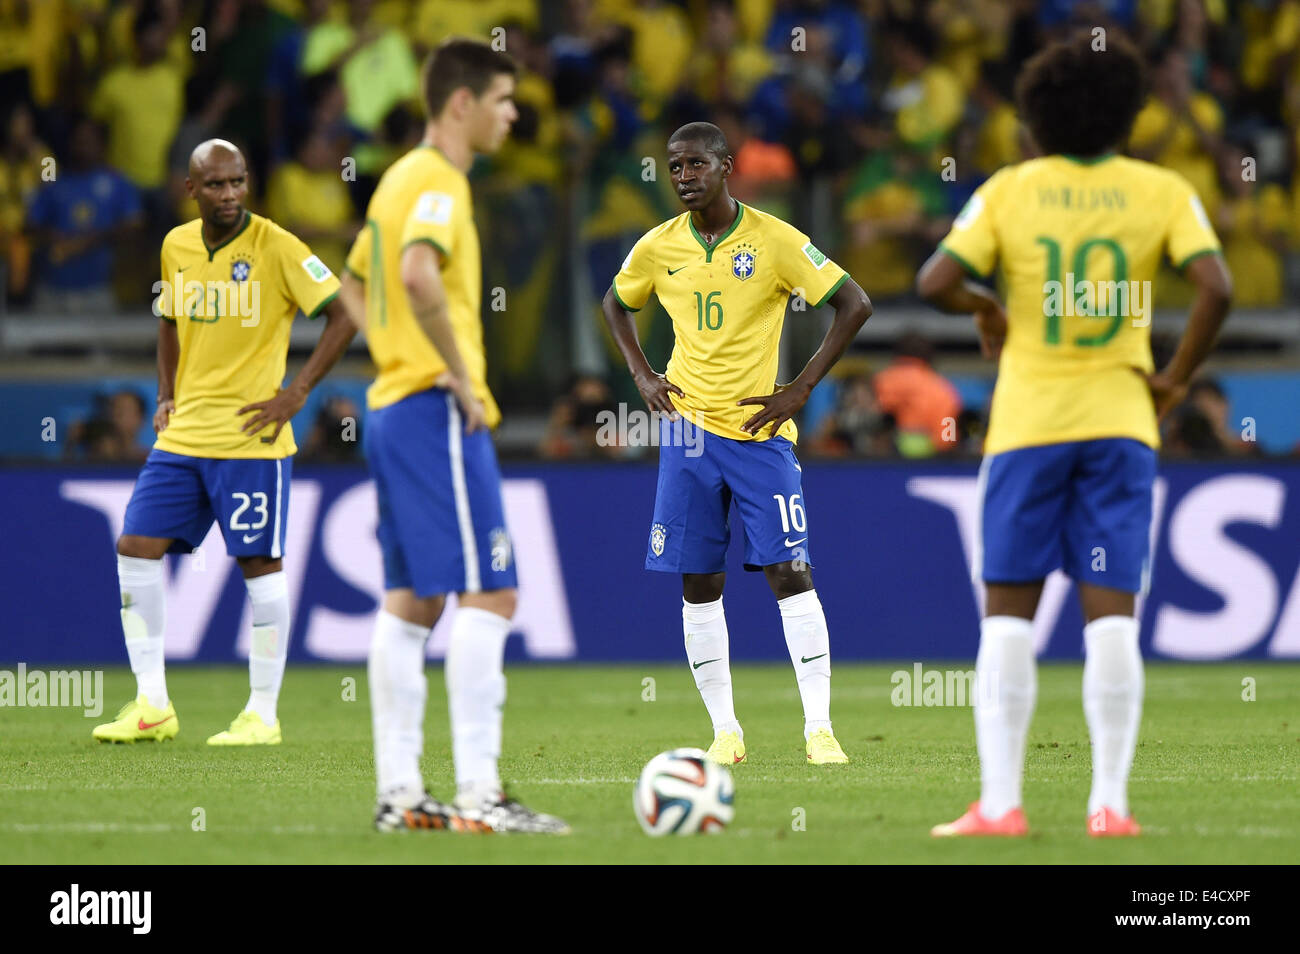 Belo Horizonte, Brazil. 8th July, 2014. Brazil's Maicon, Oscar, Ramires and Willian (from L to R) are seen during a semifinal match between Brazil and Germany of 2014 FIFA World Cup at the Estadio Mineirao Stadium in Belo Horizonte, Brazil, on July 8, 2014. Germany won 7-1 over Brazil and qualified for the final on Tuesday. Credit:  Qi Heng/Xinhua/Alamy Live News Stock Photo